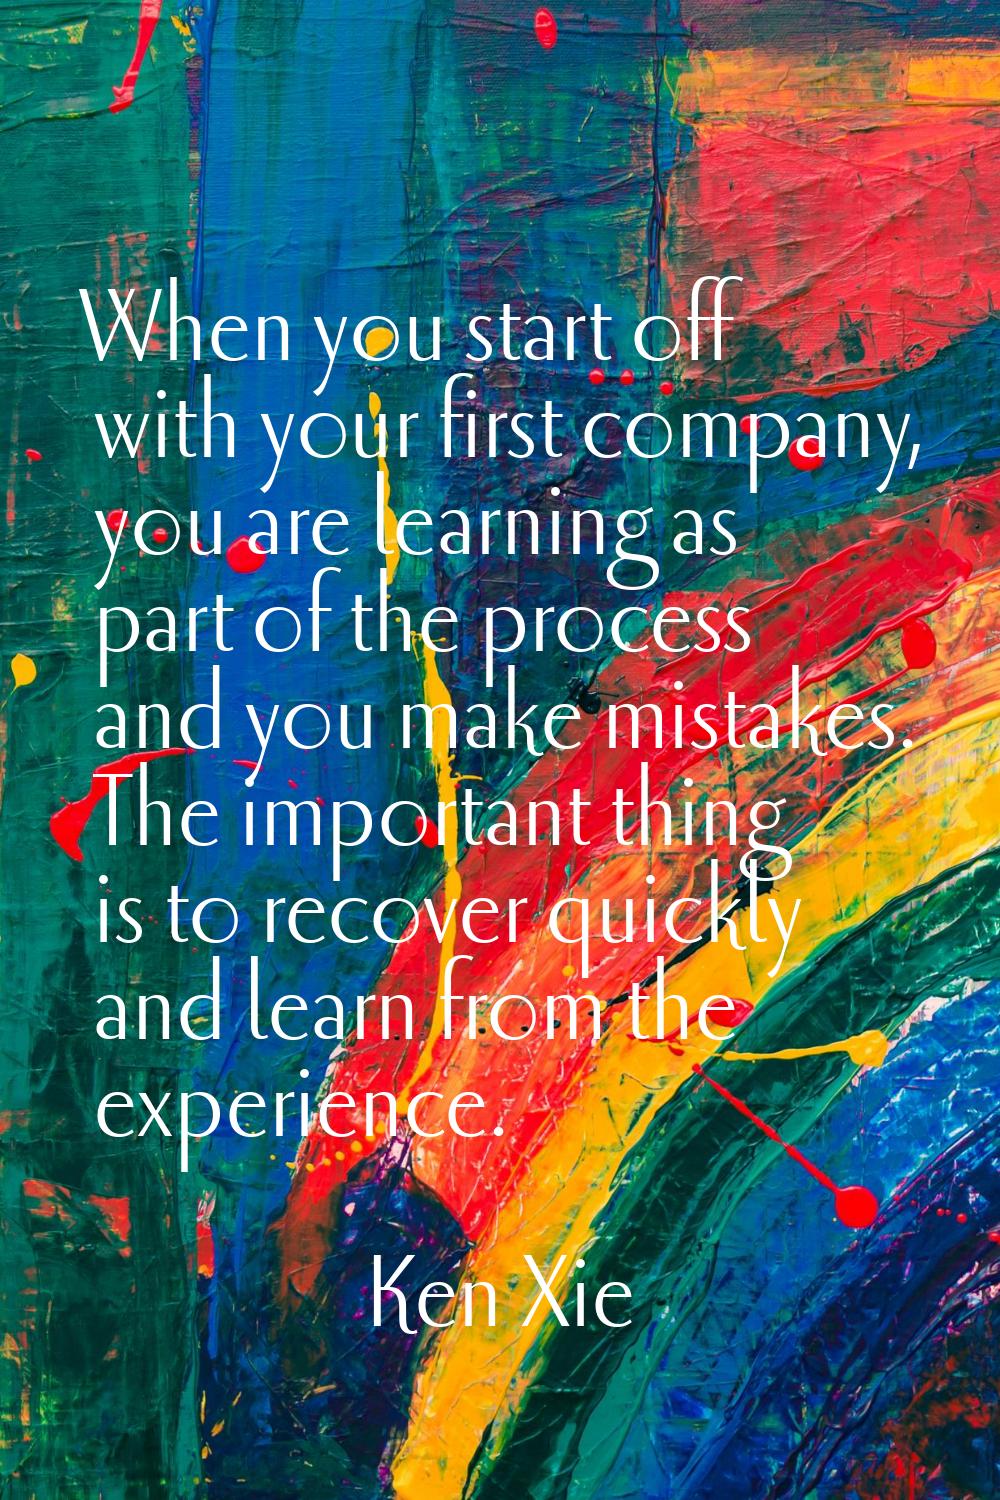 When you start off with your first company, you are learning as part of the process and you make mi